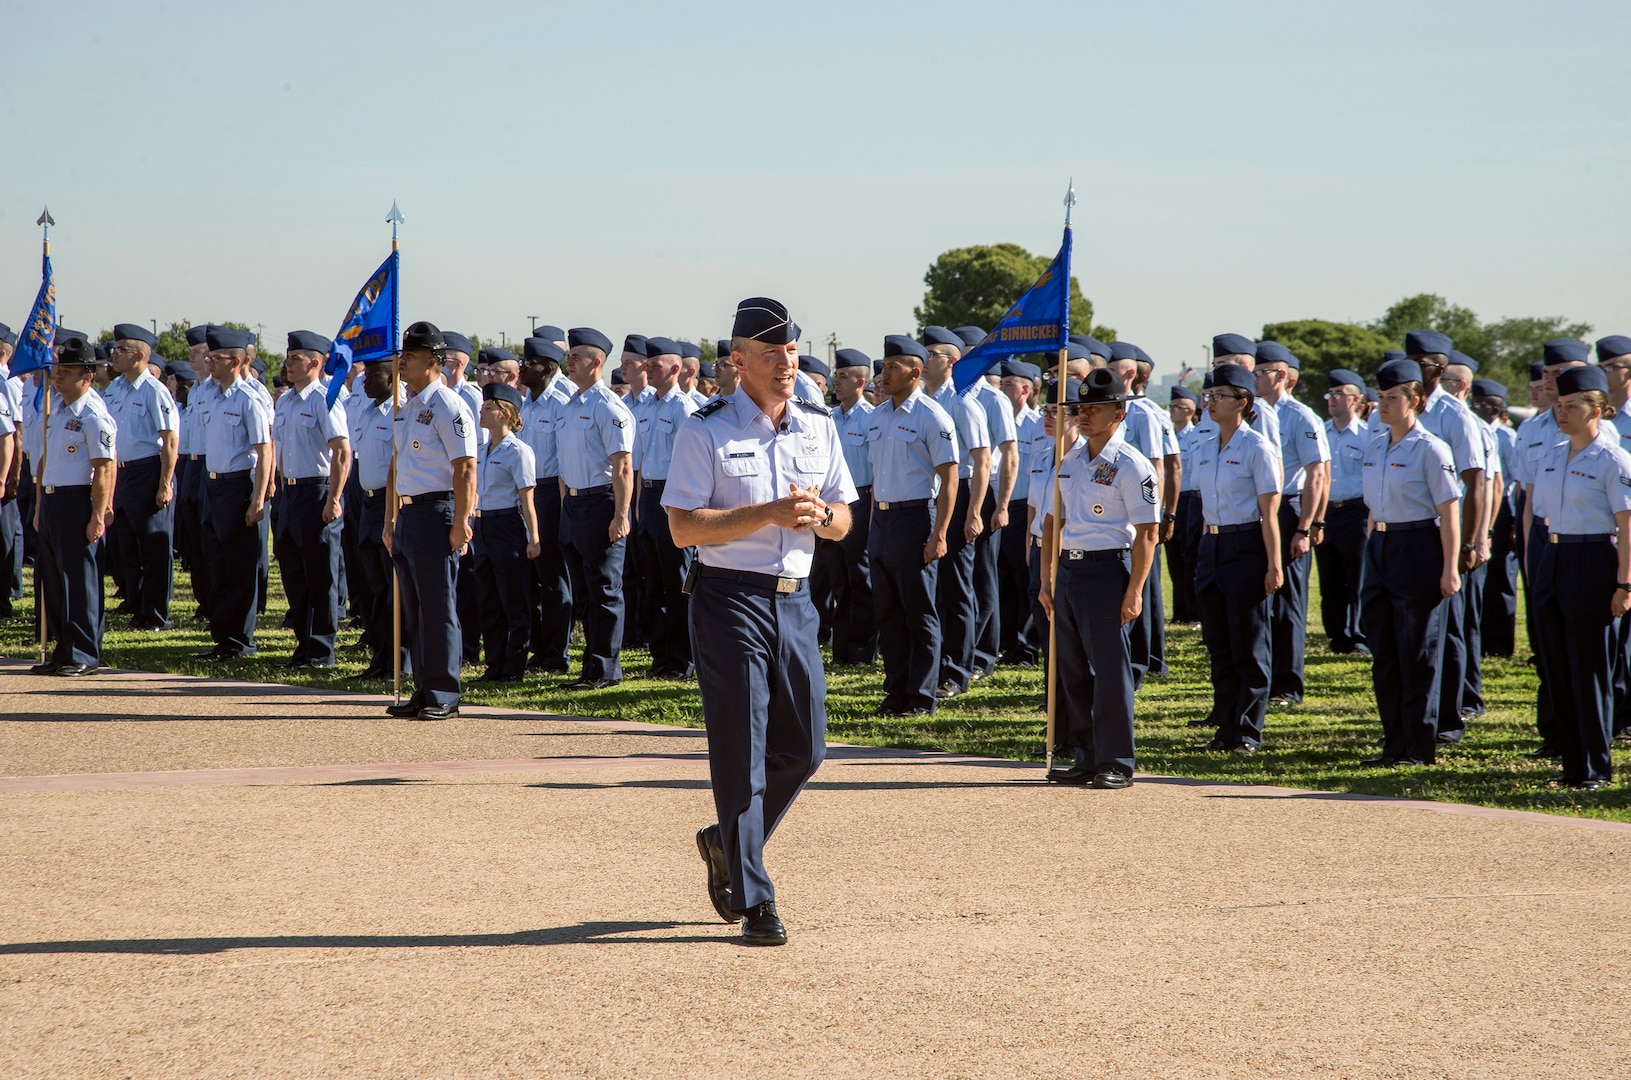 Maj. Gen. Burke “Ed” Wilson, 24th Air Forces’ fourth commander, addresses guests and Airmen during a Basic Military Training graduation Wilson officiated in San Antonio, Texas May 2016 (U.S. Air Force photo by Johnny Salvidar). 